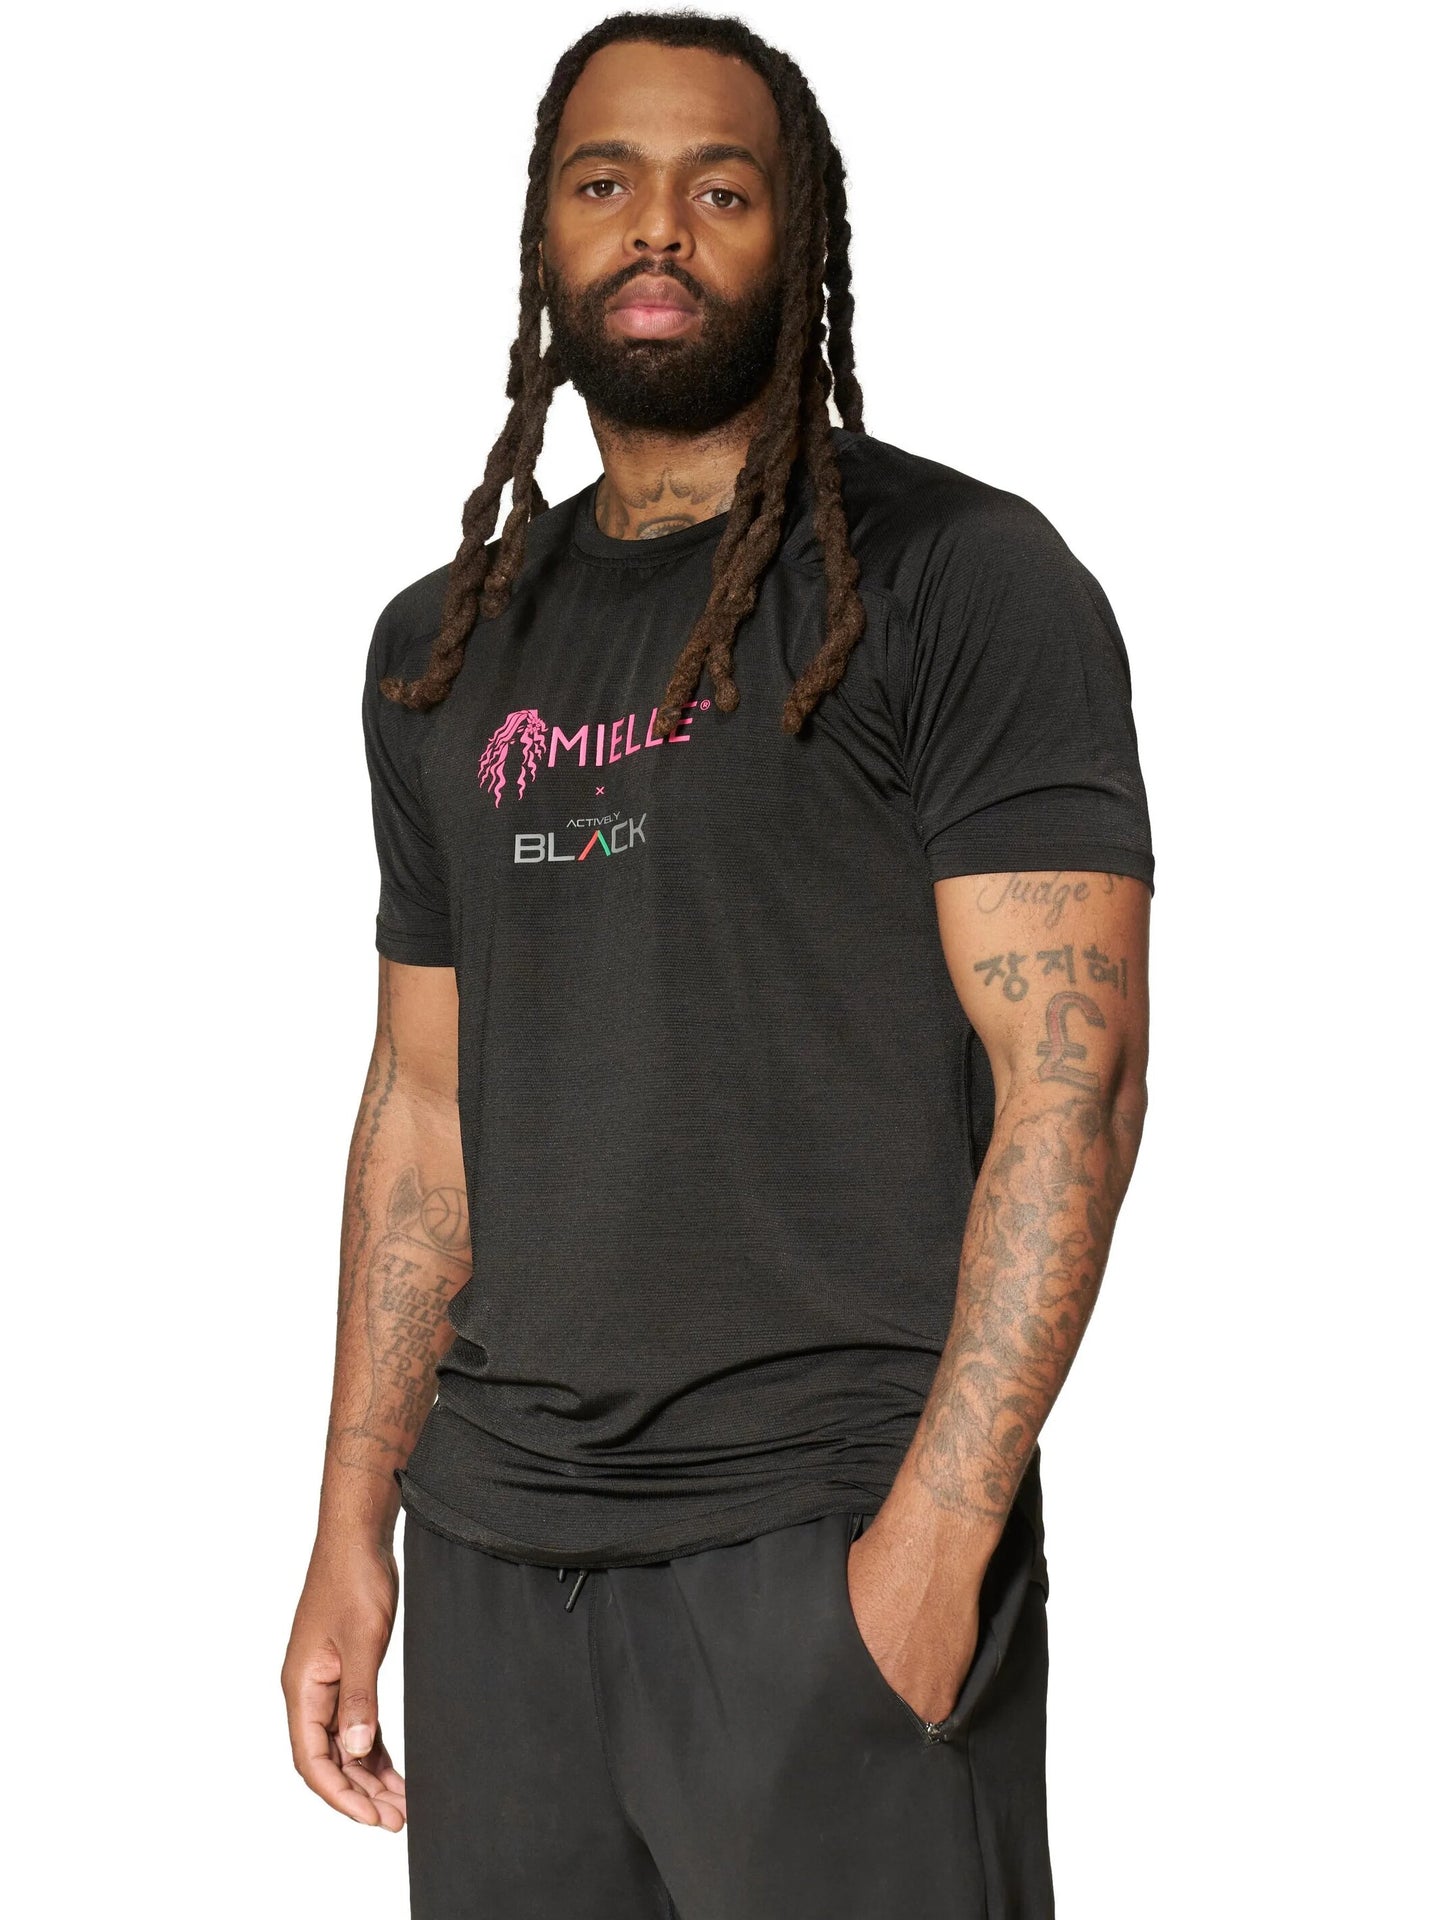 Actively Black x Mielle Pink Men's Performance Shirt